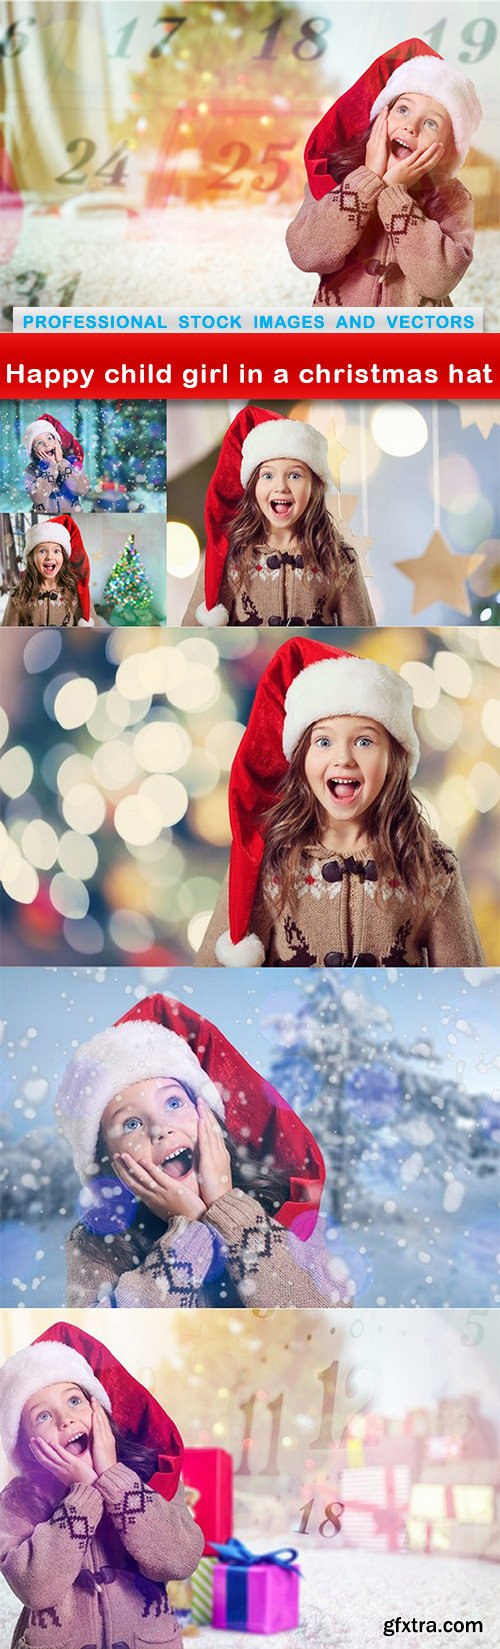 Happy child girl in a christmas hat - 7 UHQ JPEG